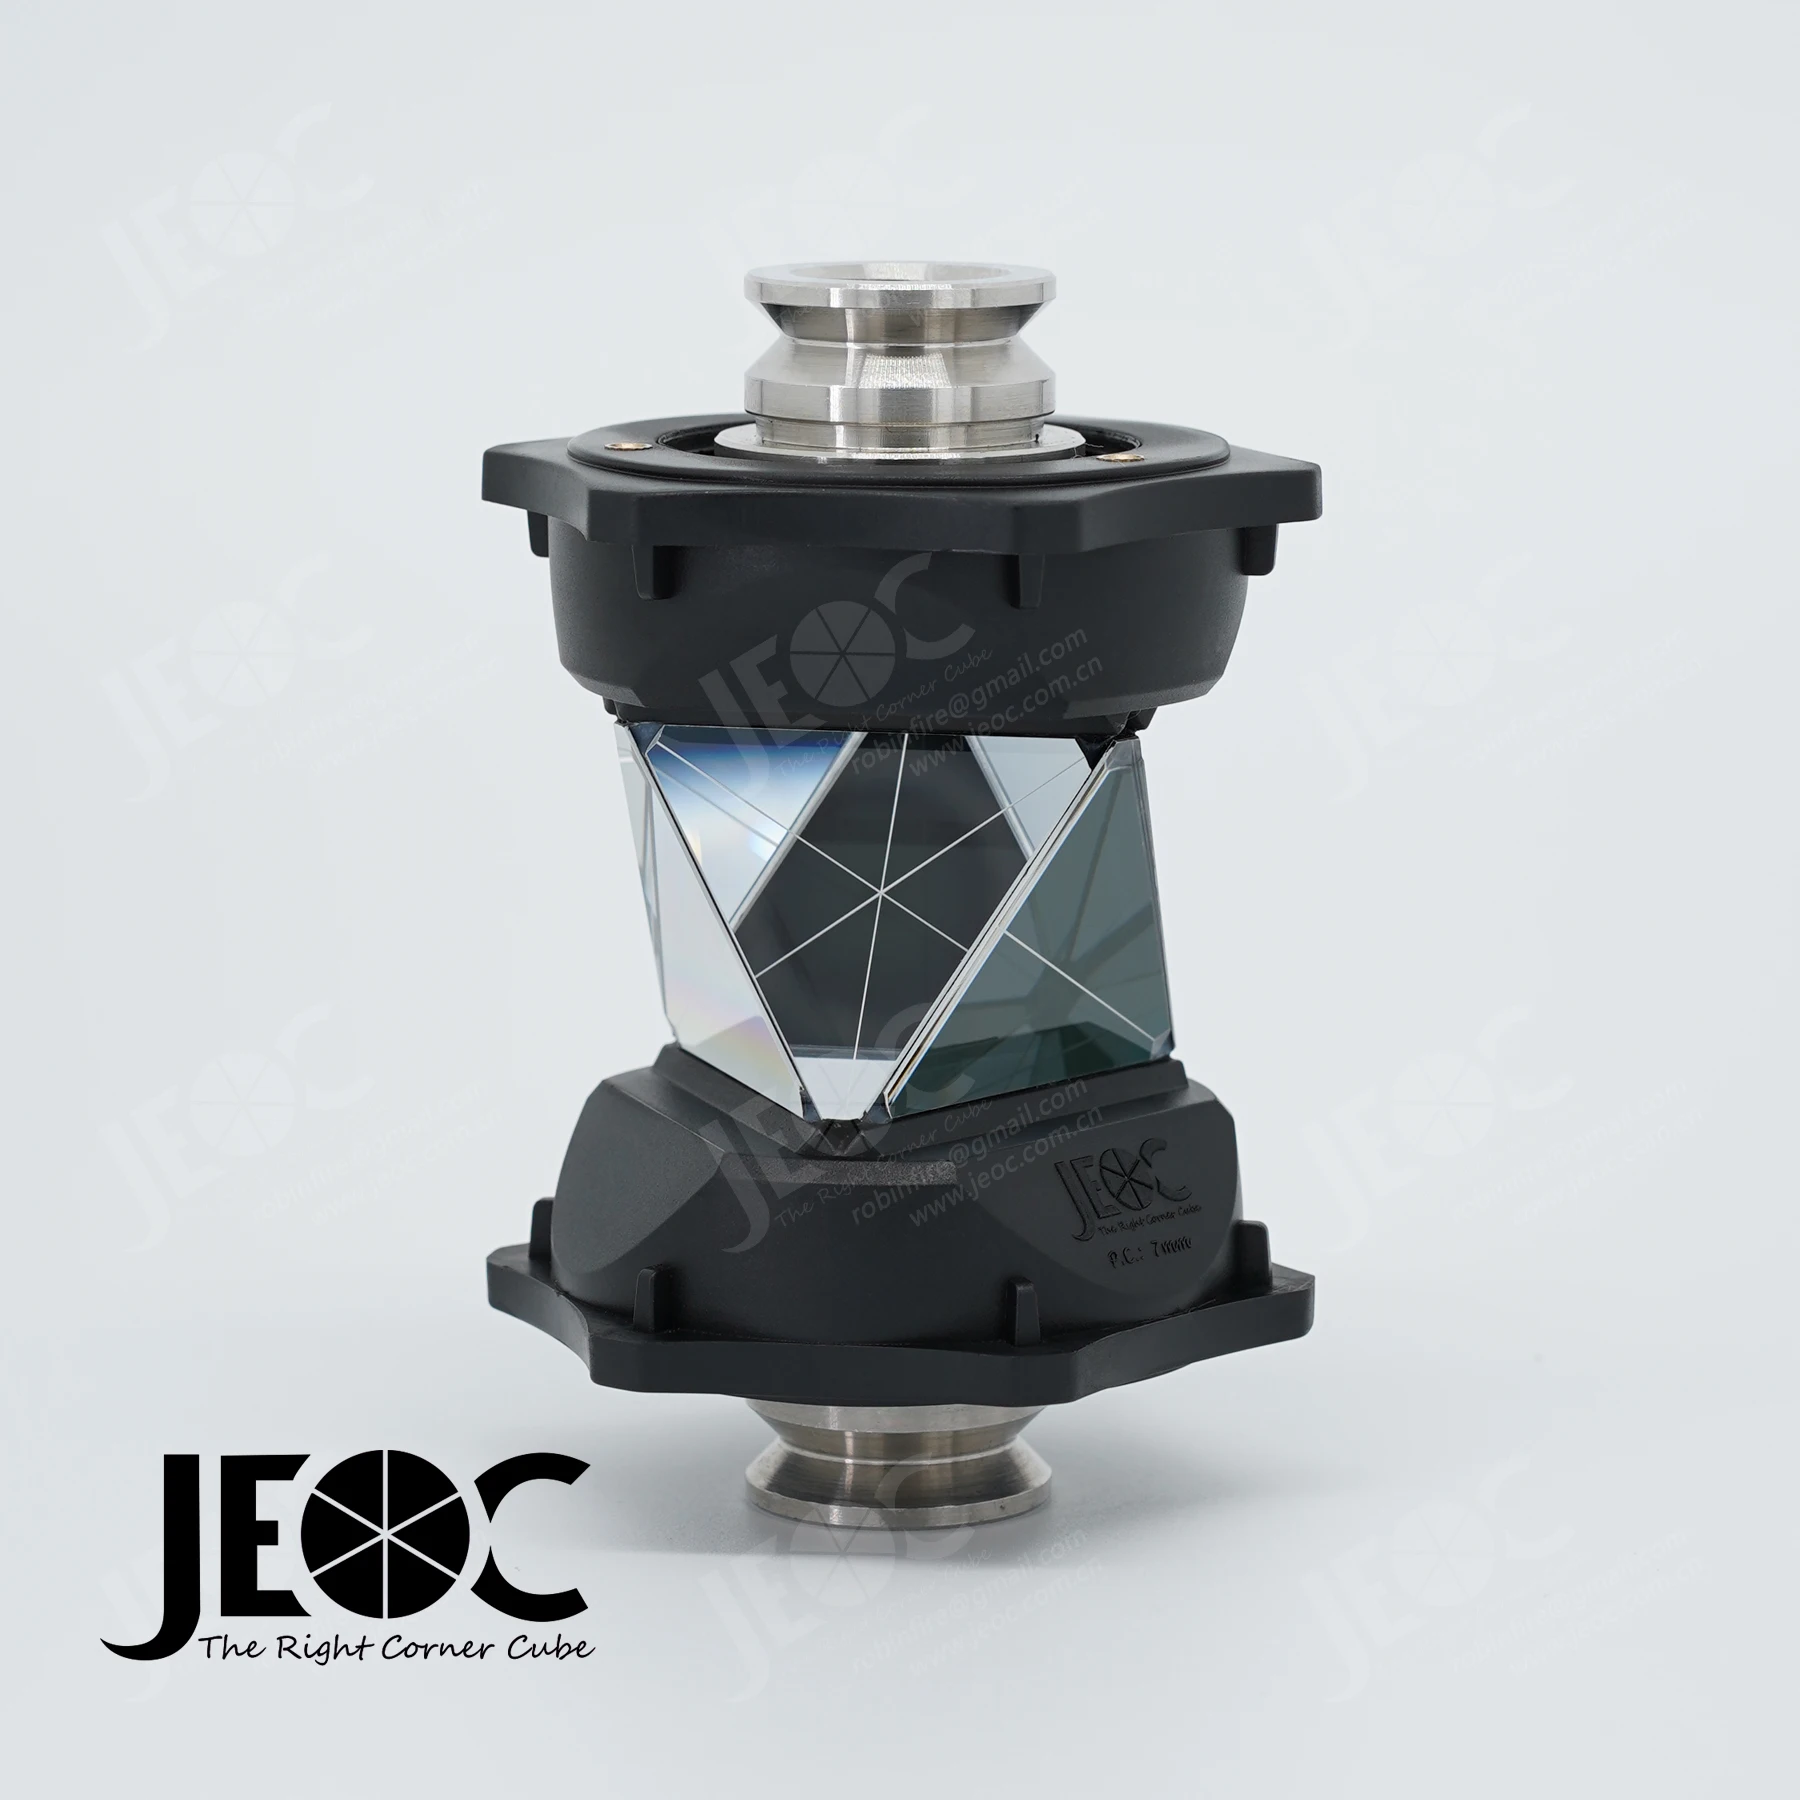 

JEOC ATP1, 3rd-Party Reflector for Japanese Total-Station,360 Degree Reflective Prism, Survey Accessories Topography